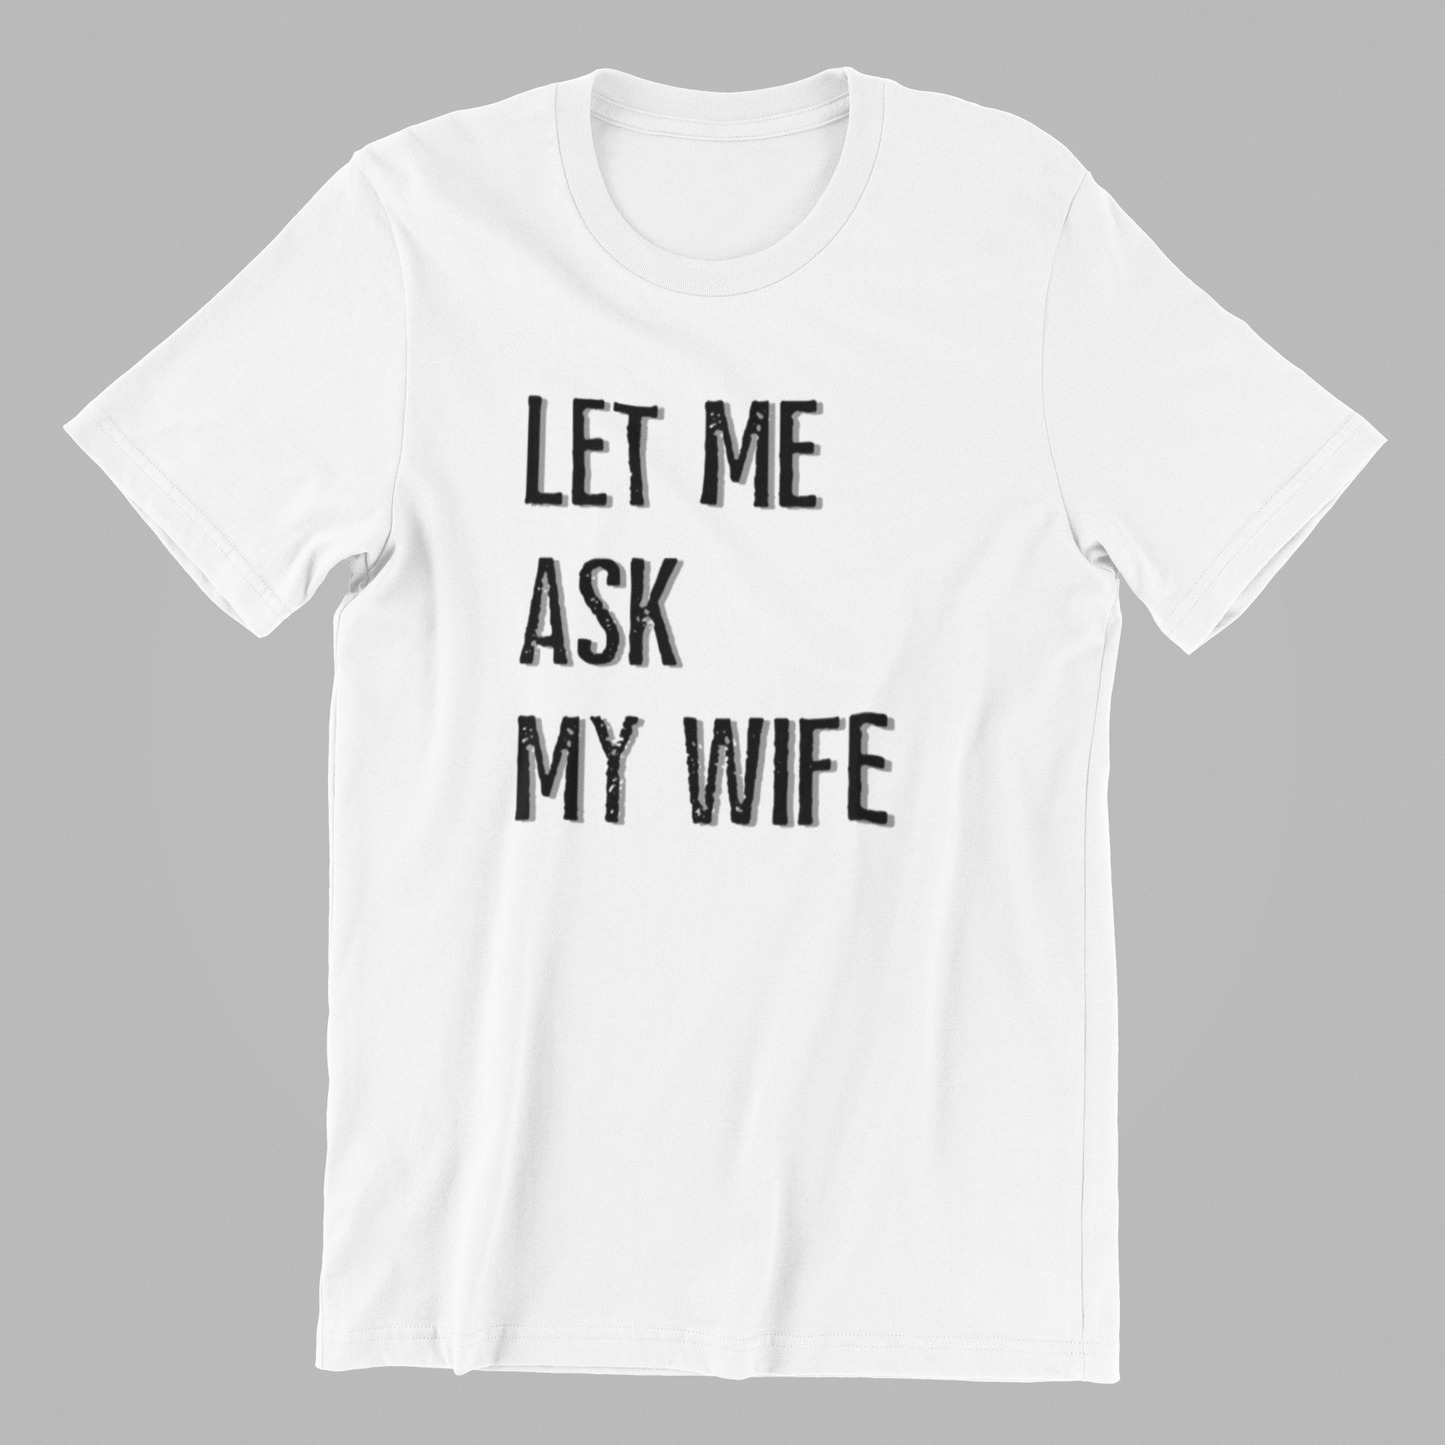 Let Me Ask My Wife Tee